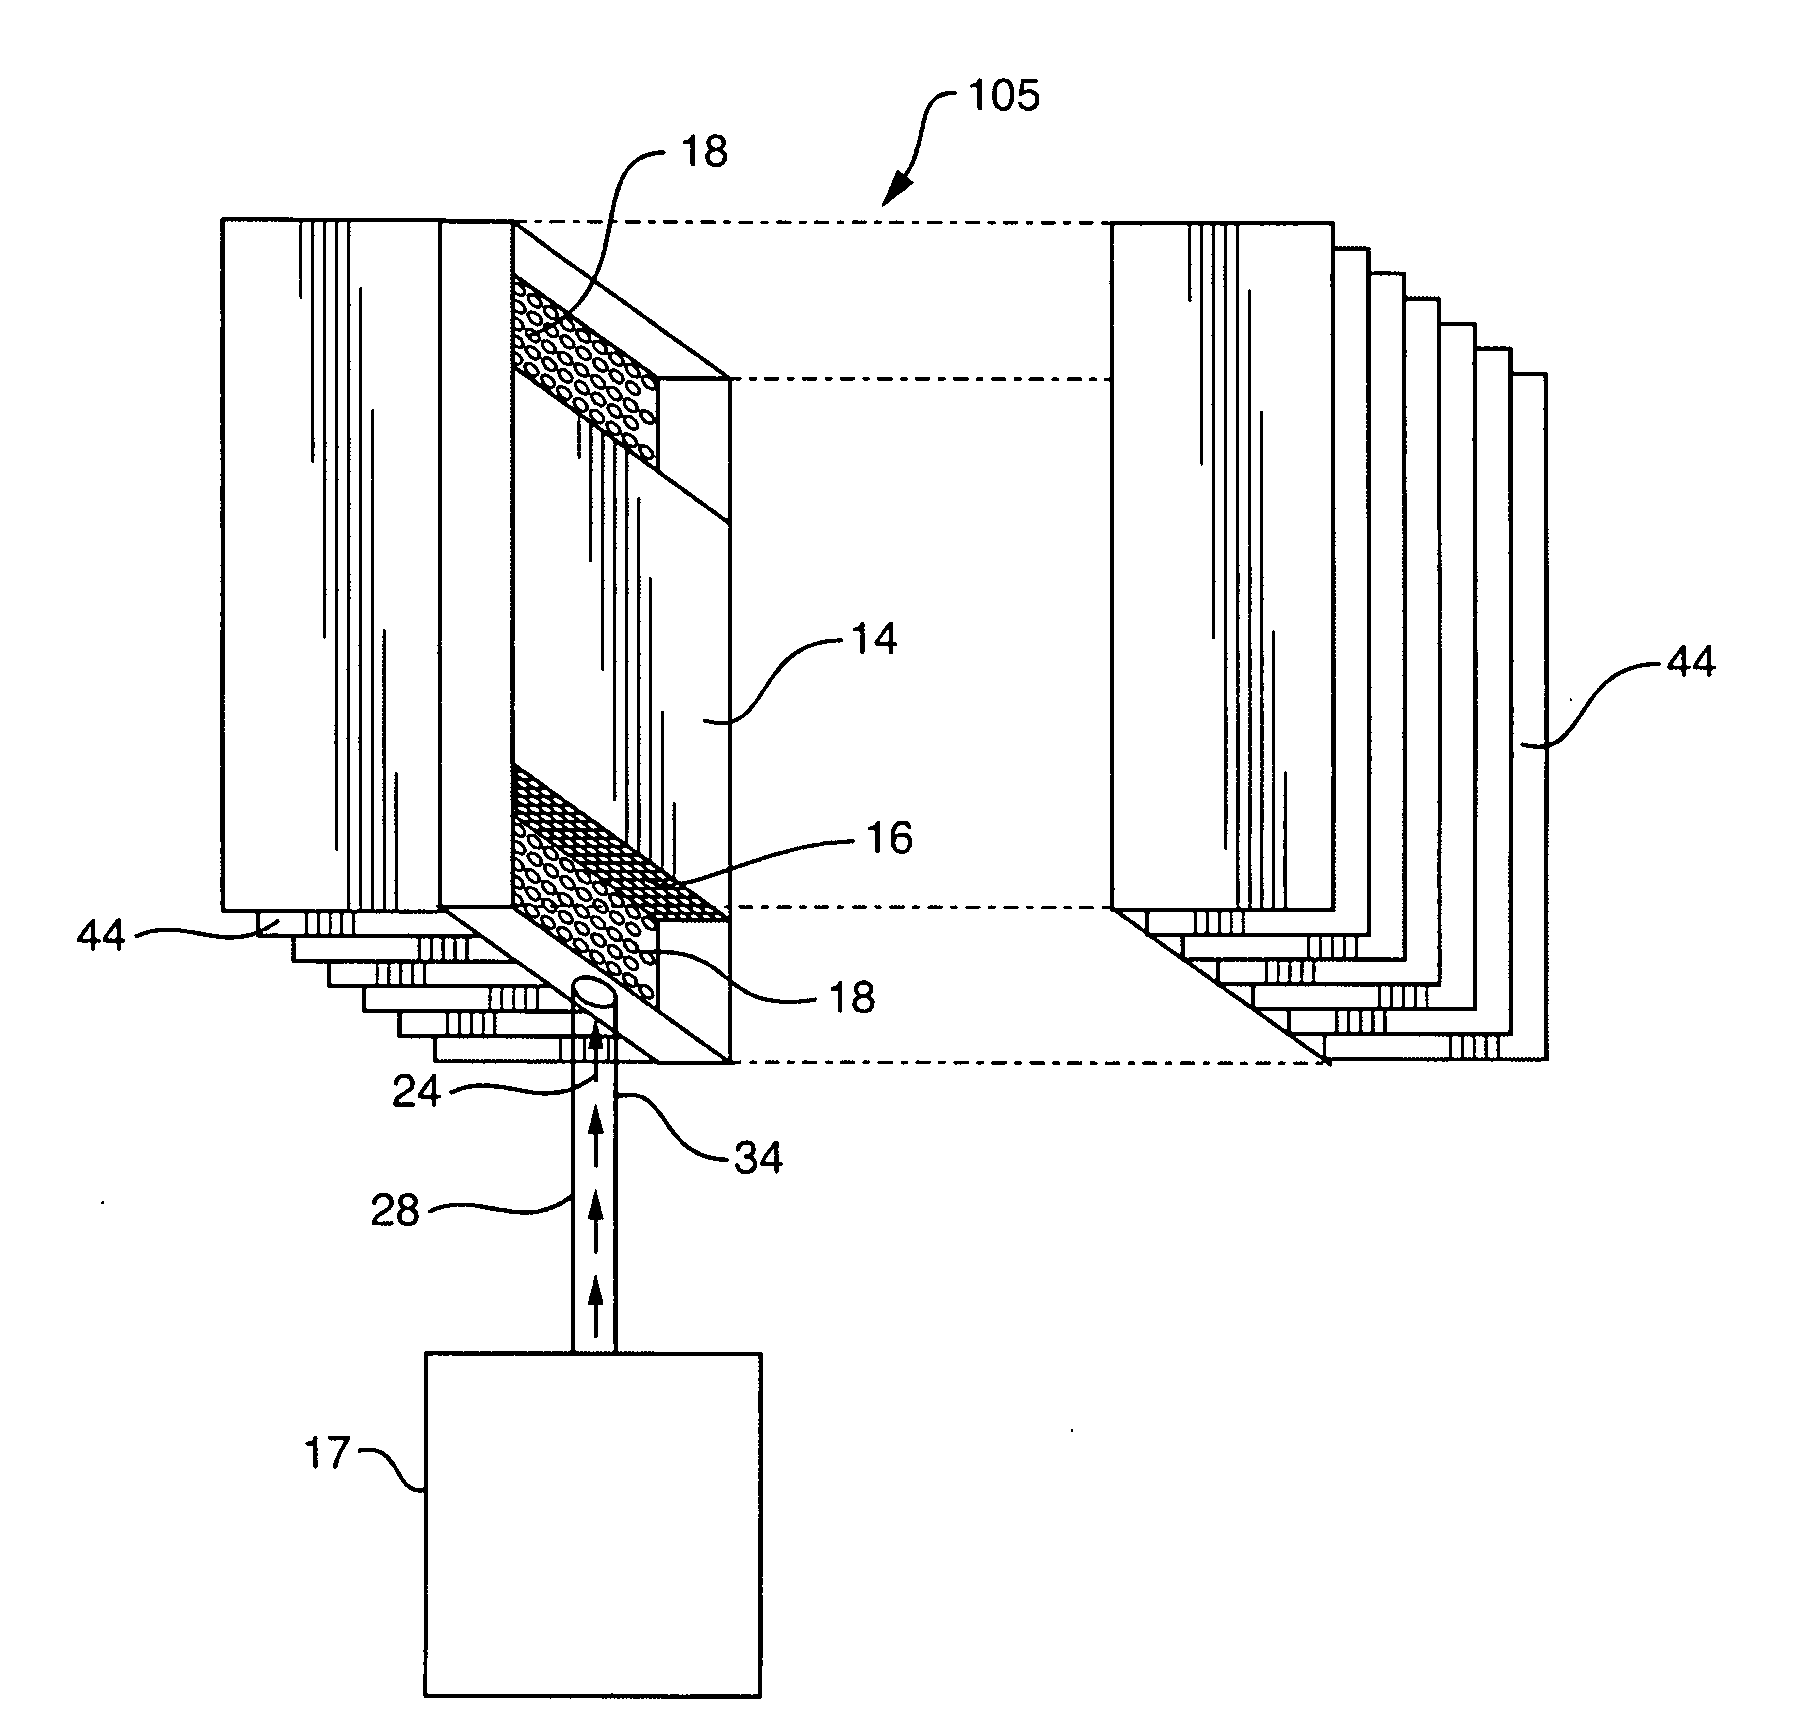 Heat pipes incorporating microchannel heat exchangers